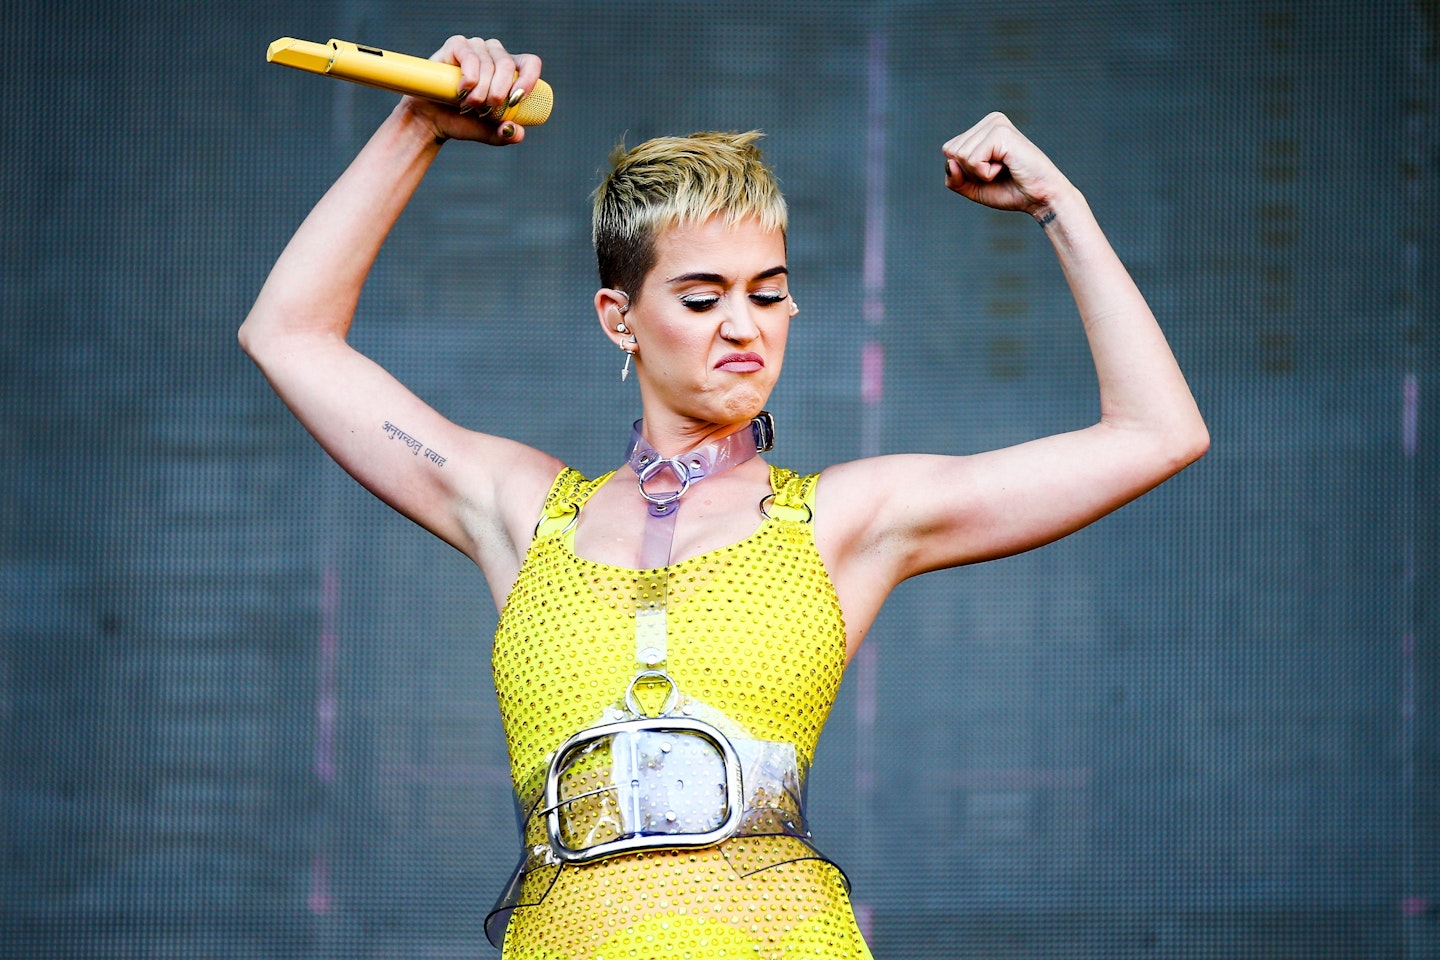 Katy Perry is a Guinness World Record holder